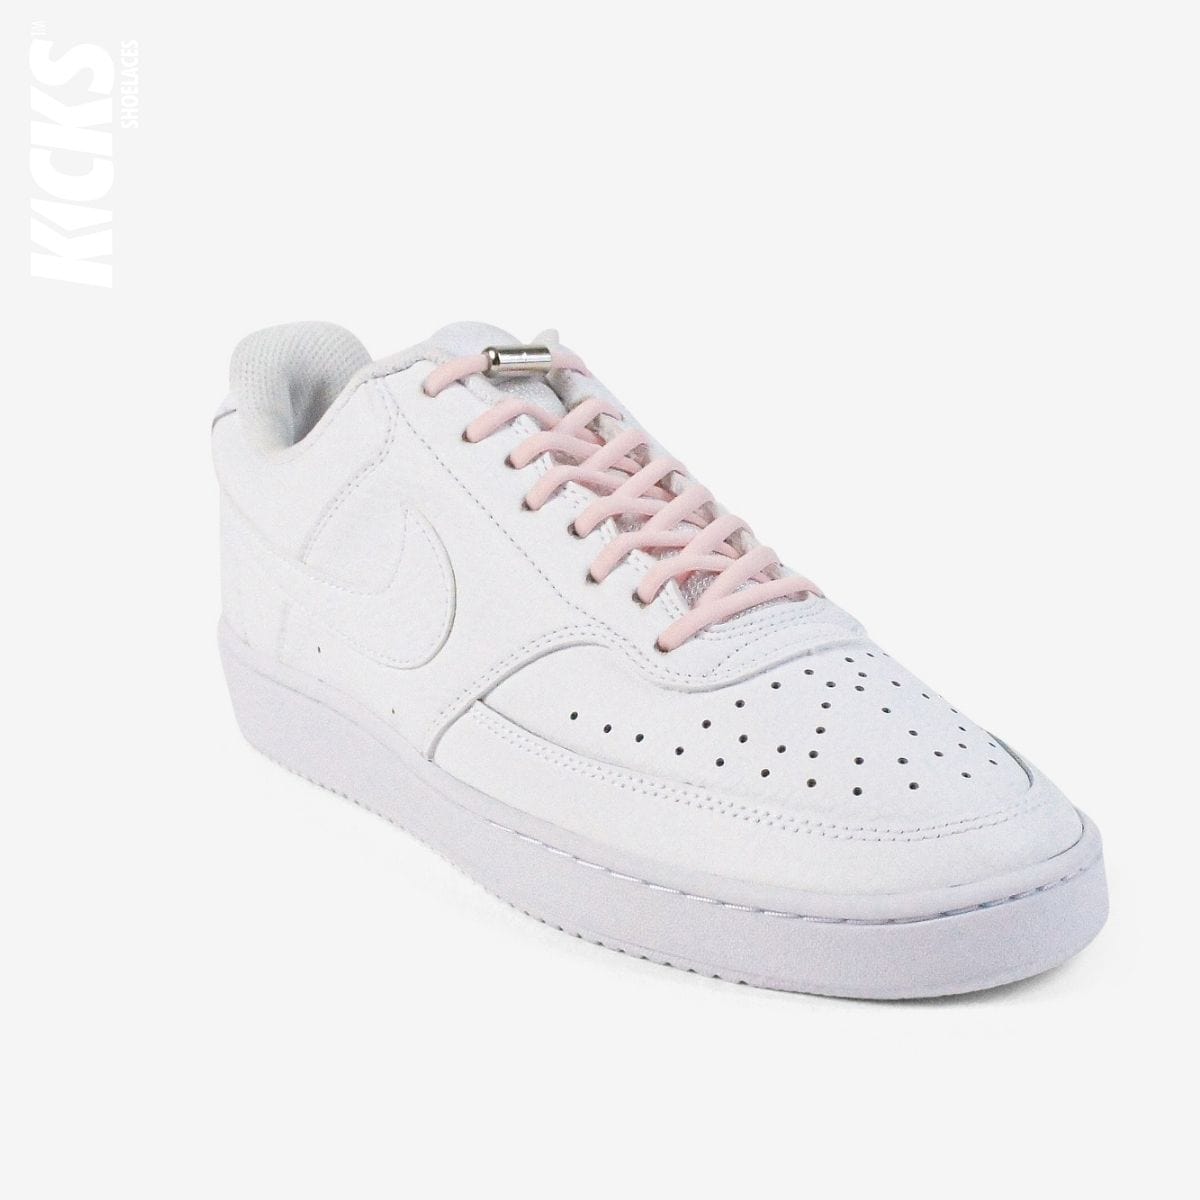 round-no-tie-shoelaces-with-pastel-pink-laces-on-nike-white-sneakers-by-kicks-shoelaces